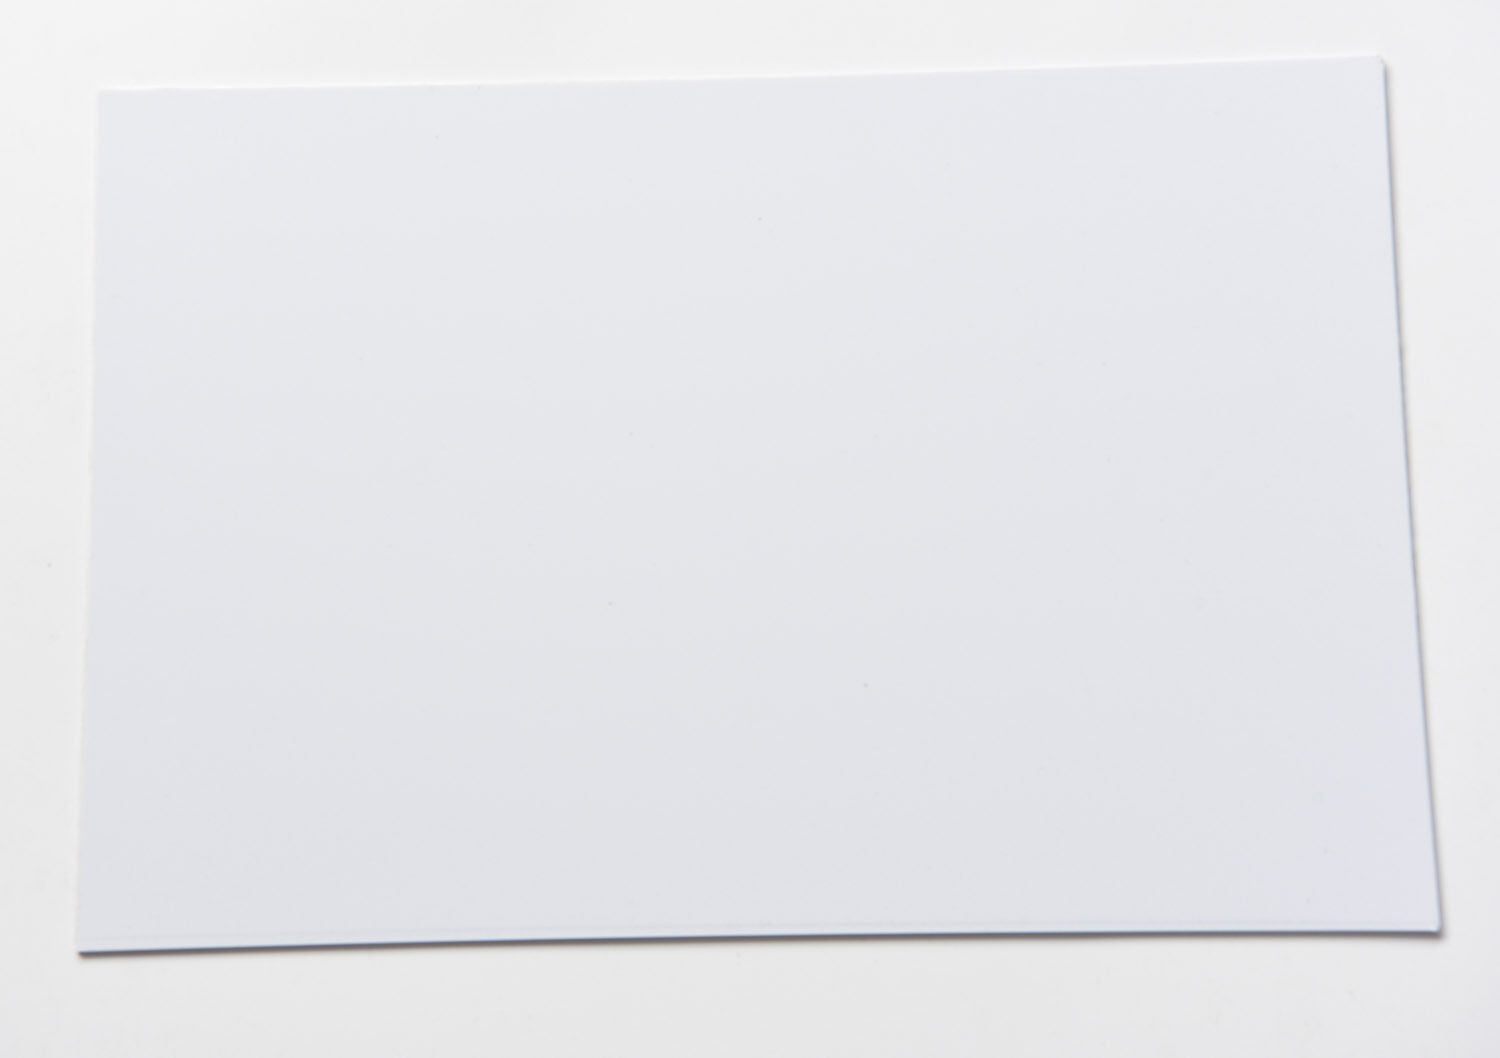 Solid White 1 Ply Blank Pickguard Scratch Plate Material Sheet 290x430(mm)